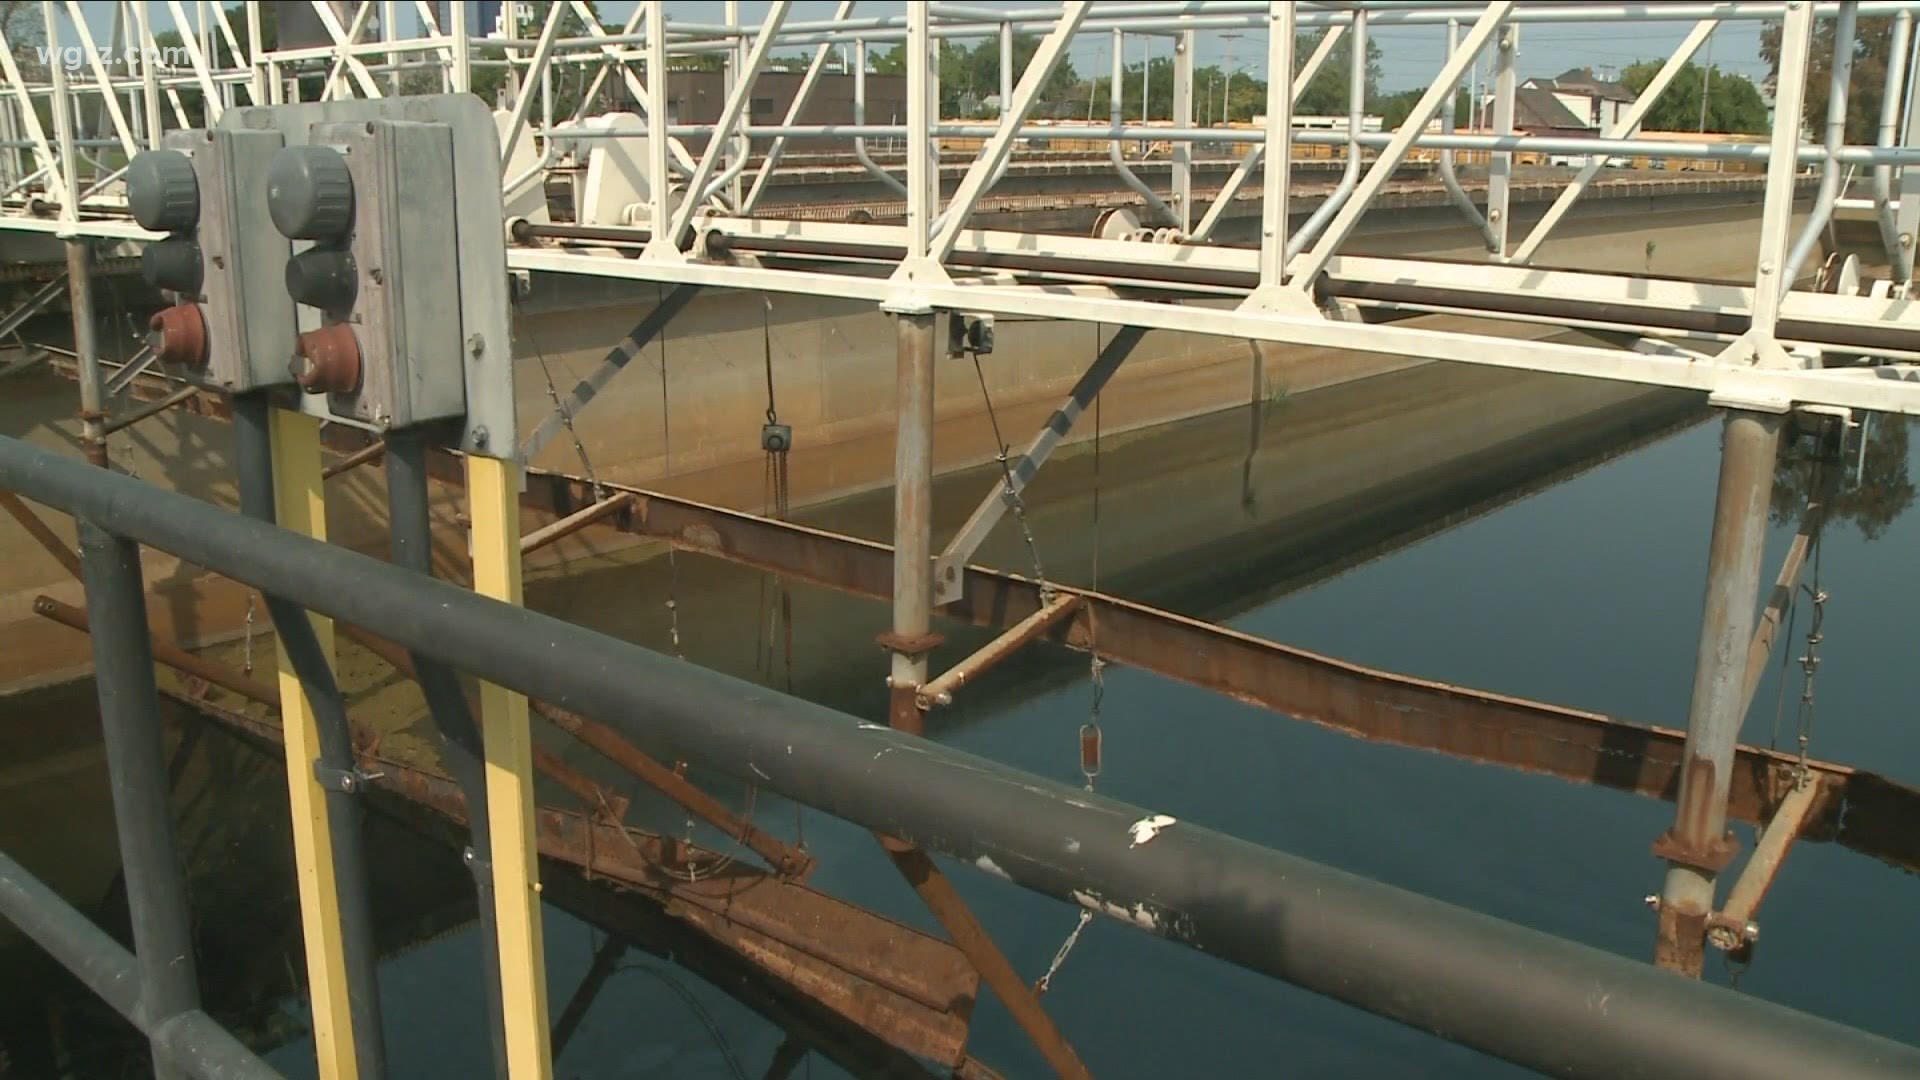 Erie County Testing Waste Water For COVID-19